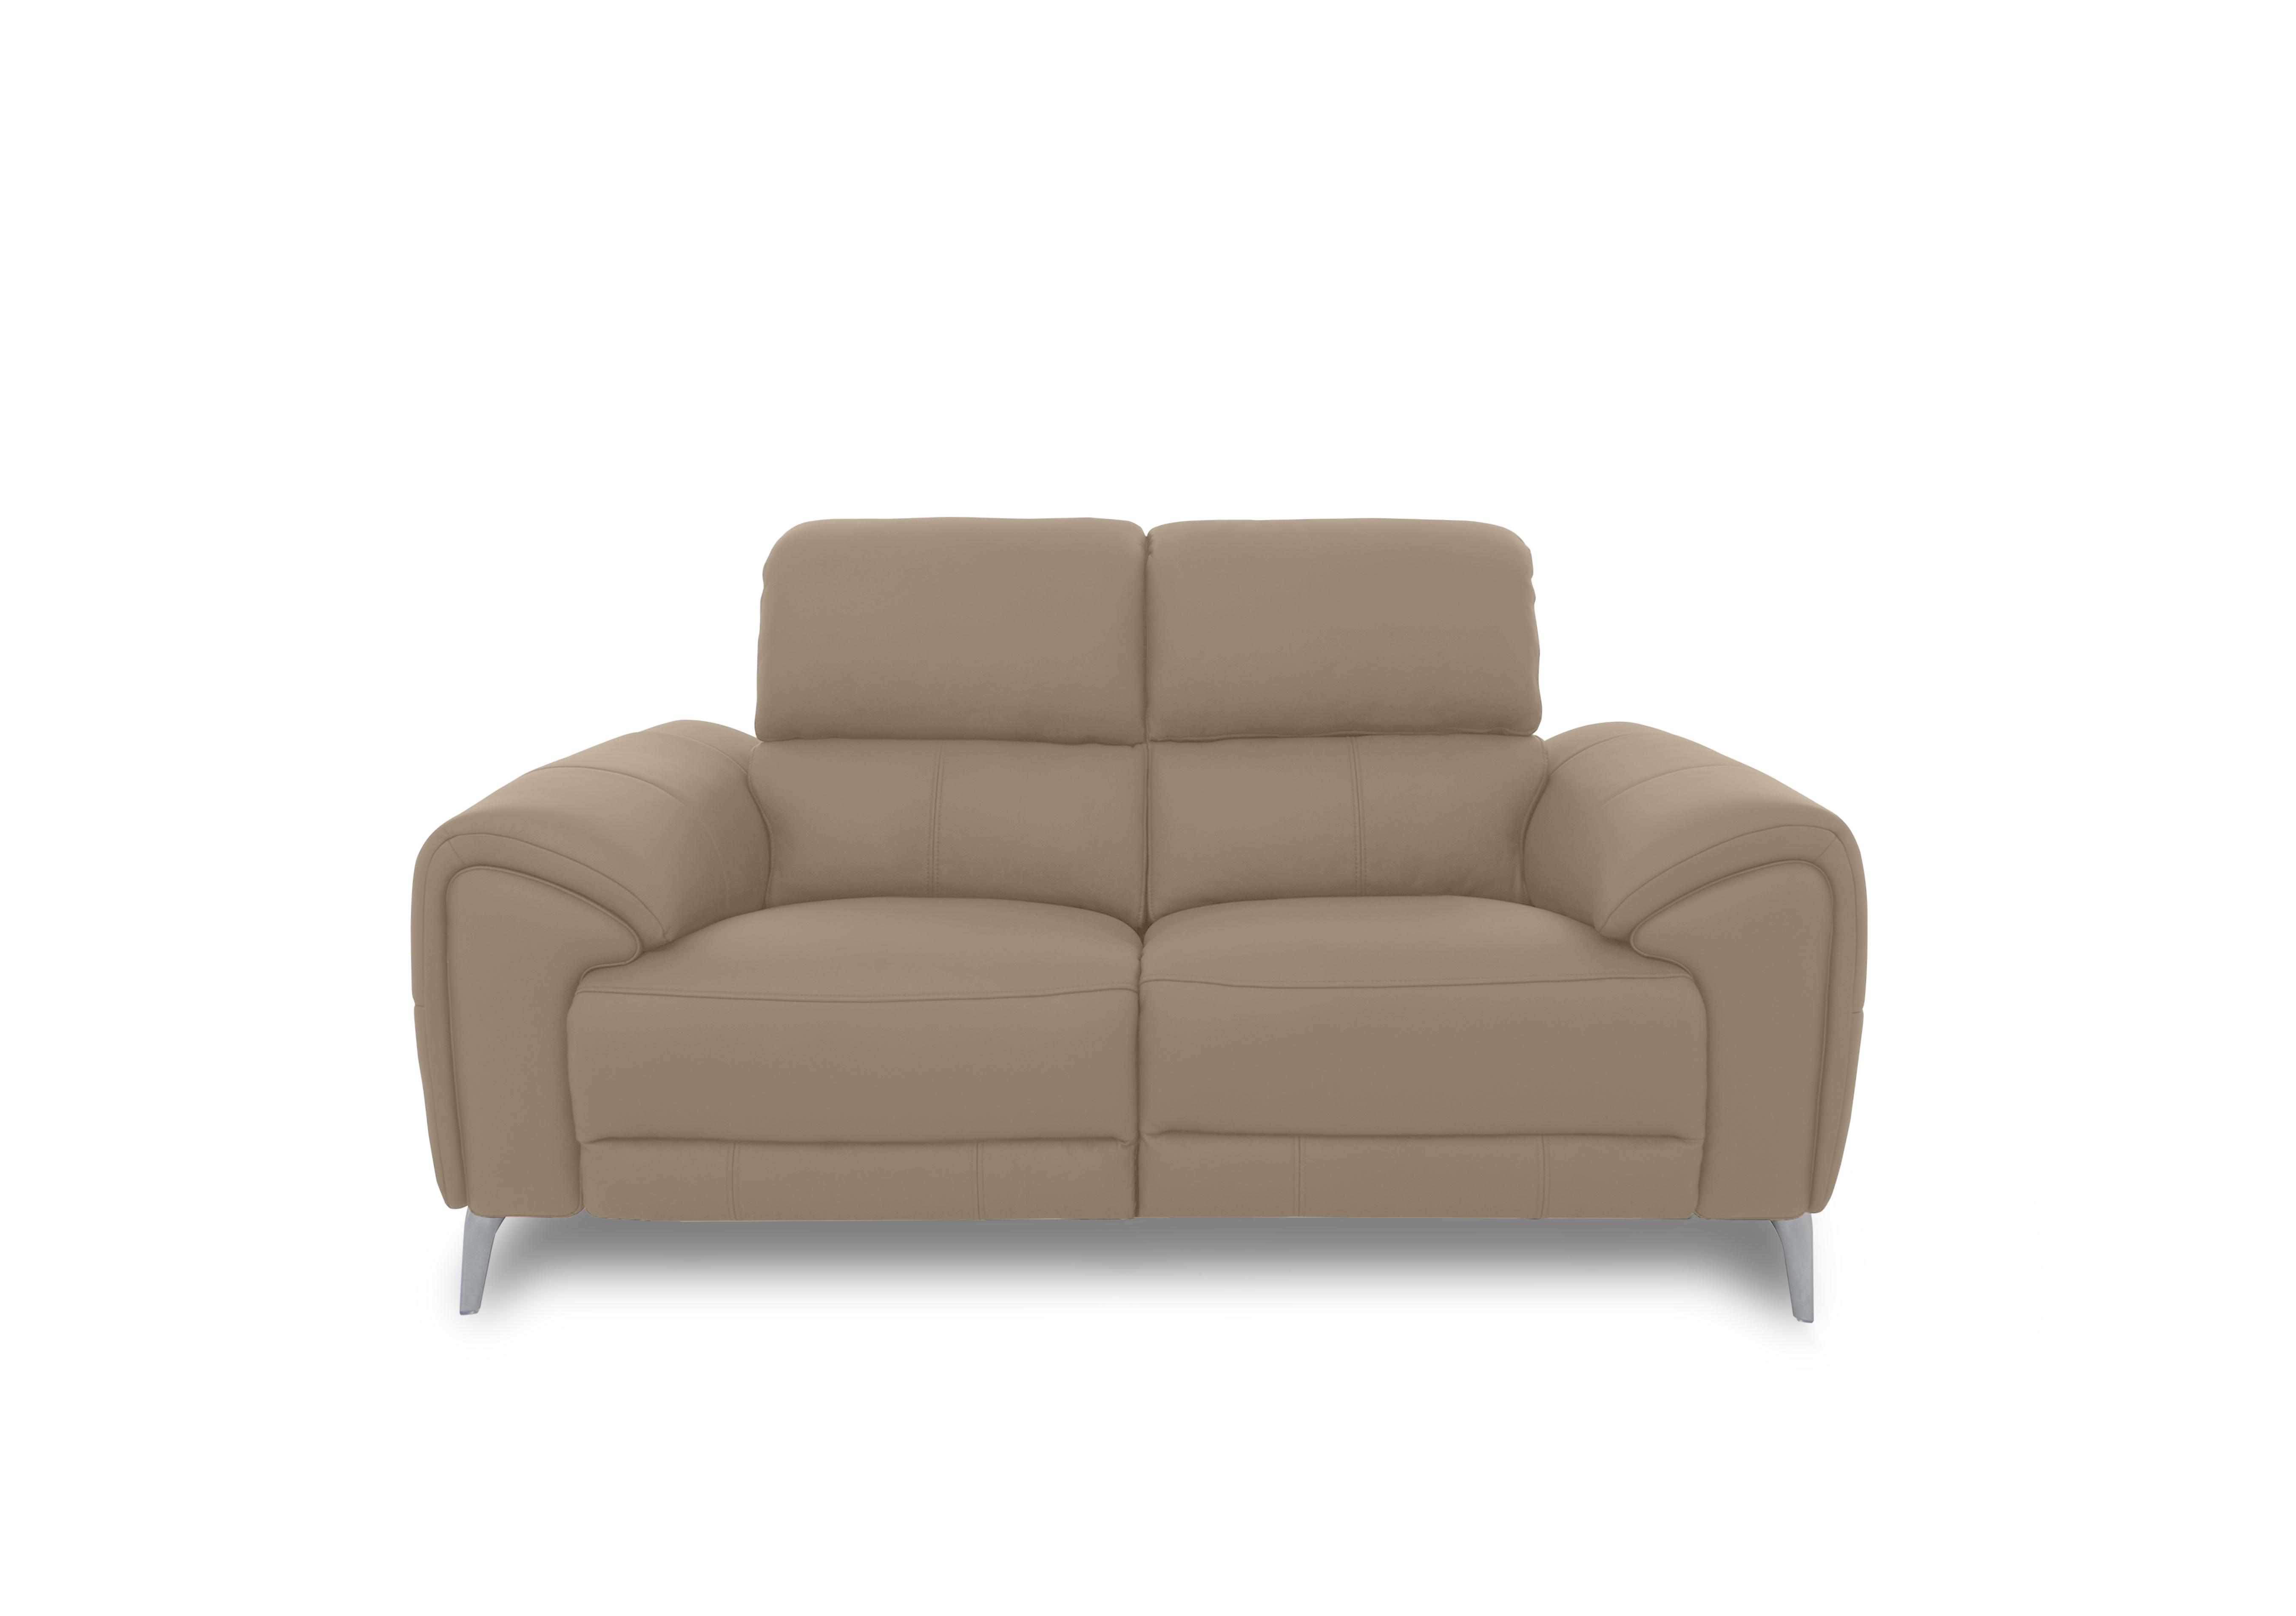 Vino Leather 2 Seater Sofa in Cat-60/06 Barley on Furniture Village